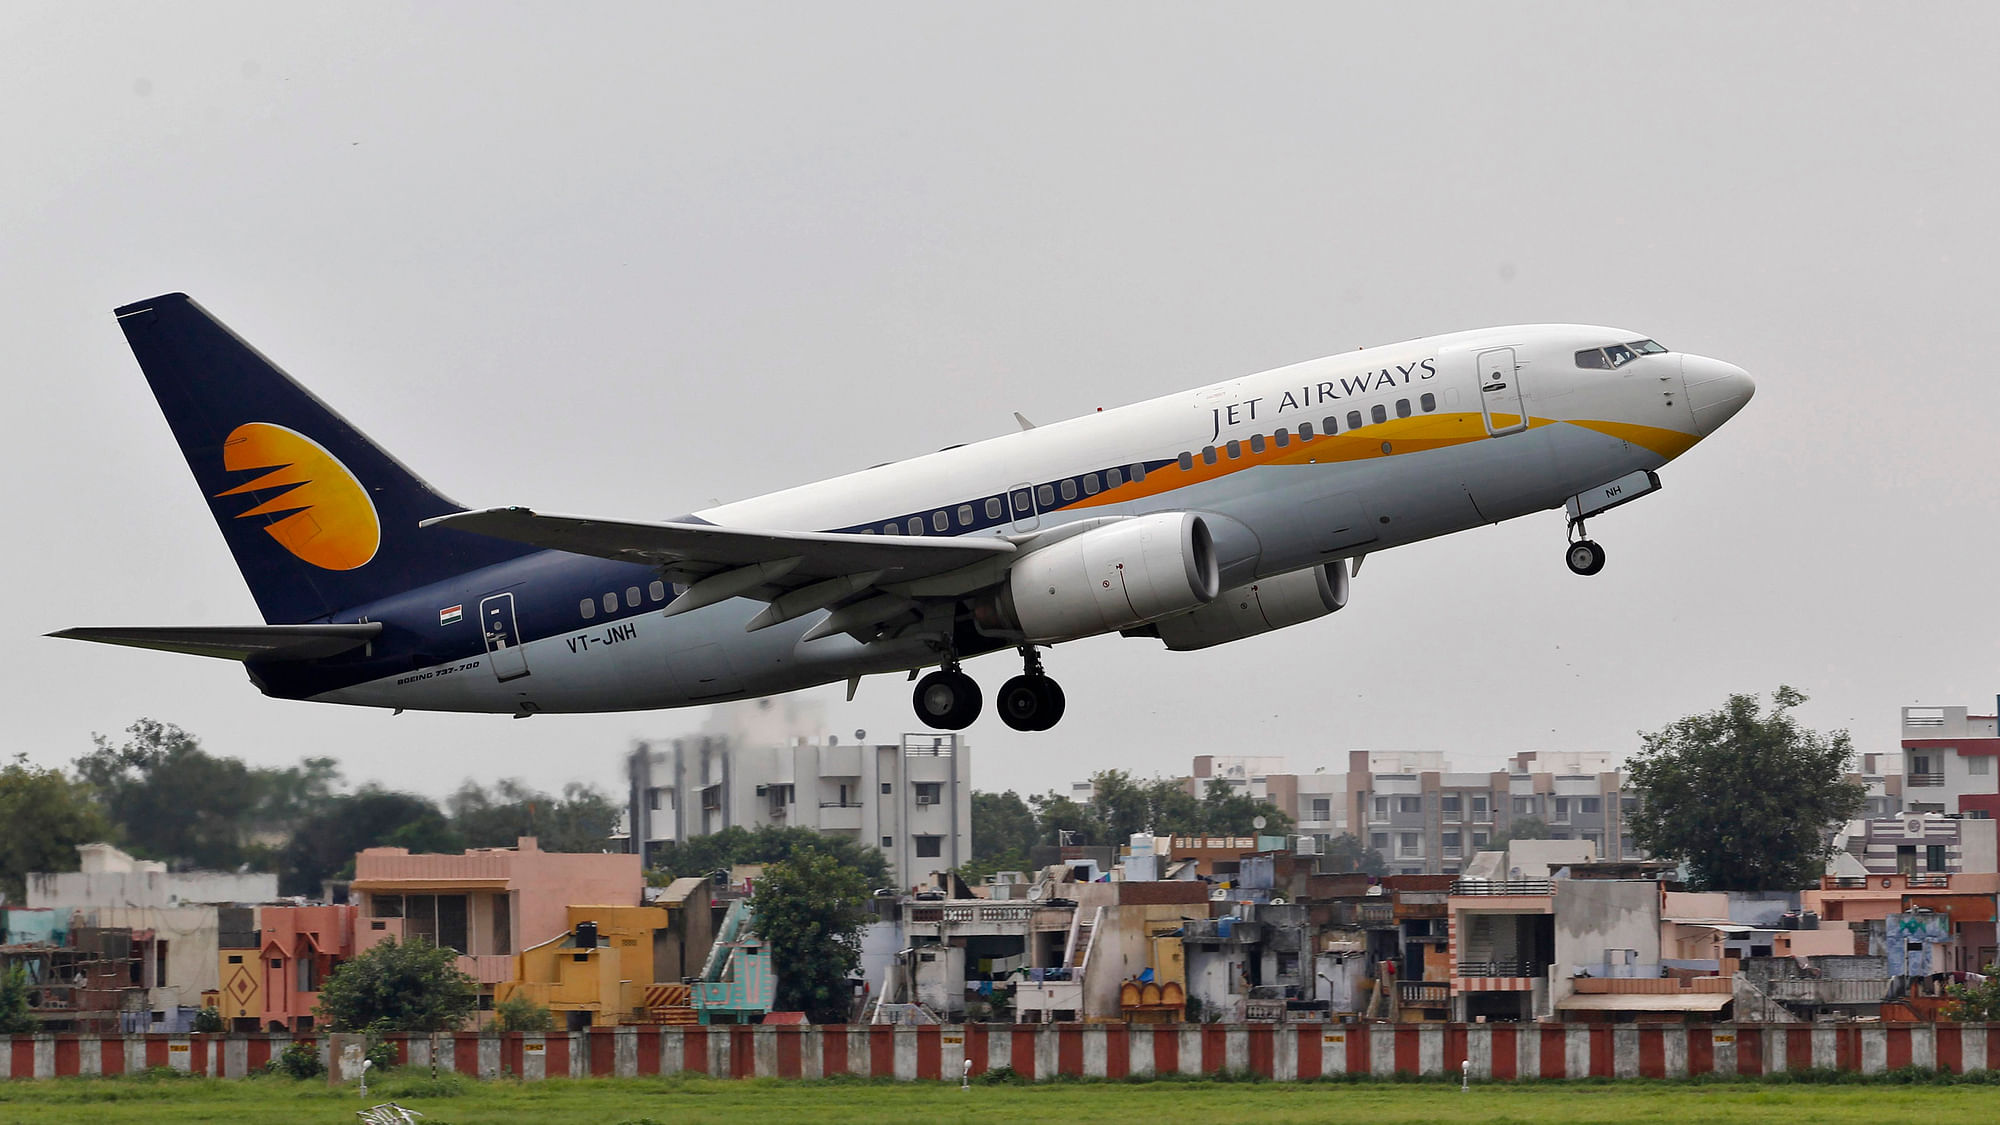 Jet Airways has already suspended services on the Mumbai-Manchester route.